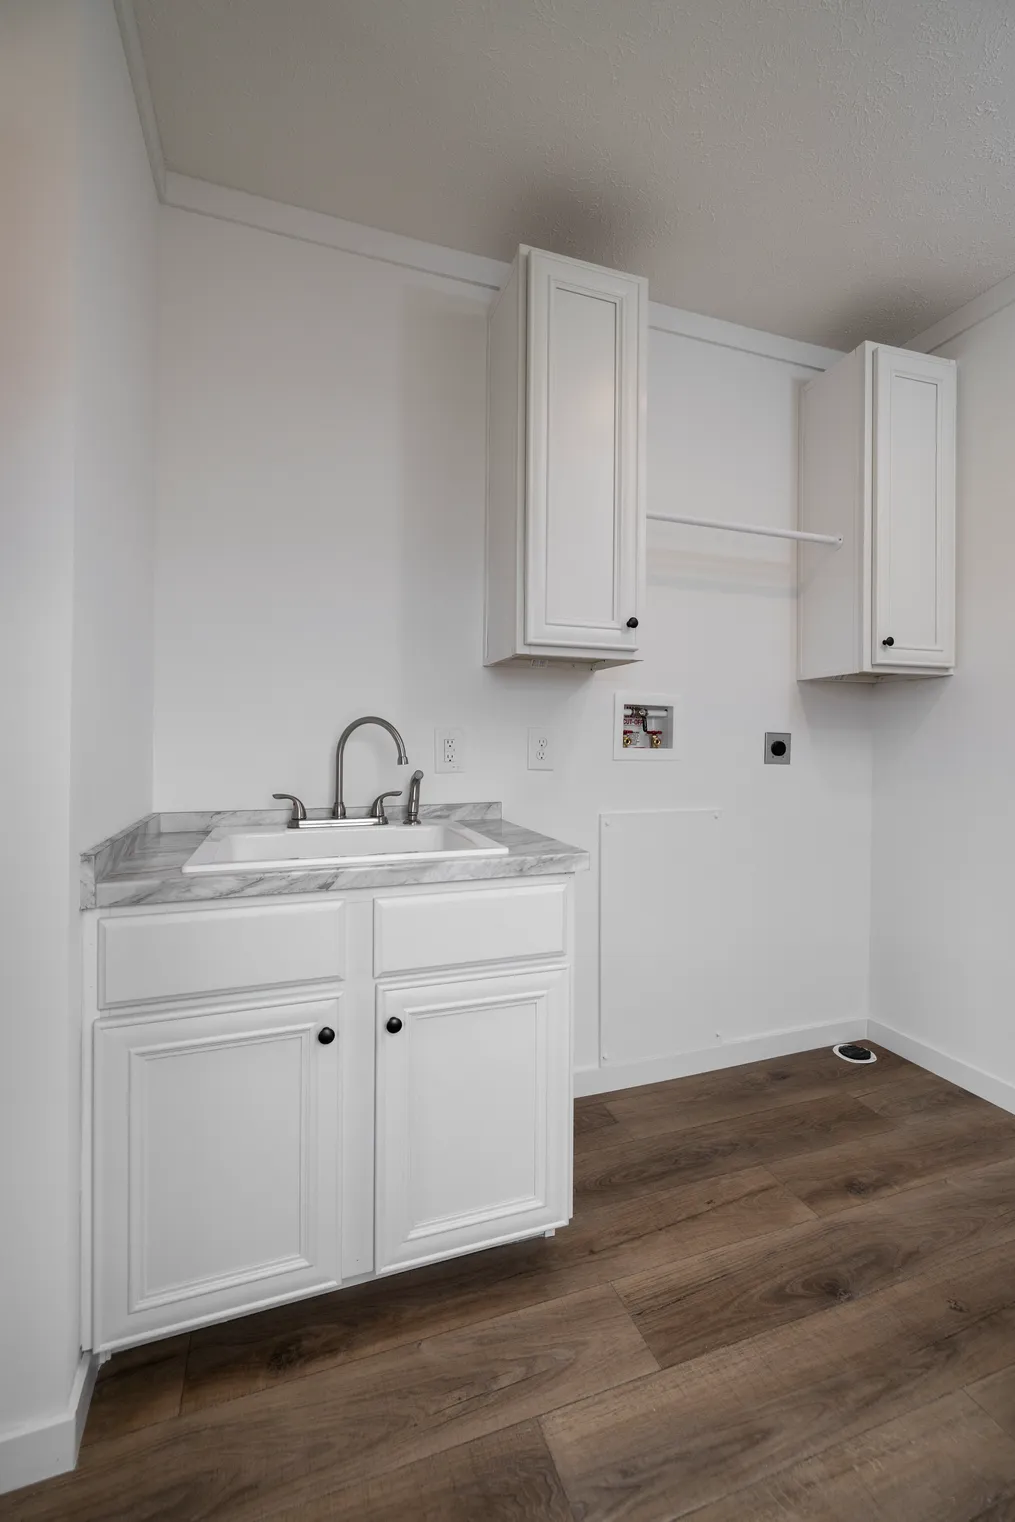 The THE ANNA FAE Utility Room. This Manufactured Mobile Home features 3 bedrooms and 2 baths.